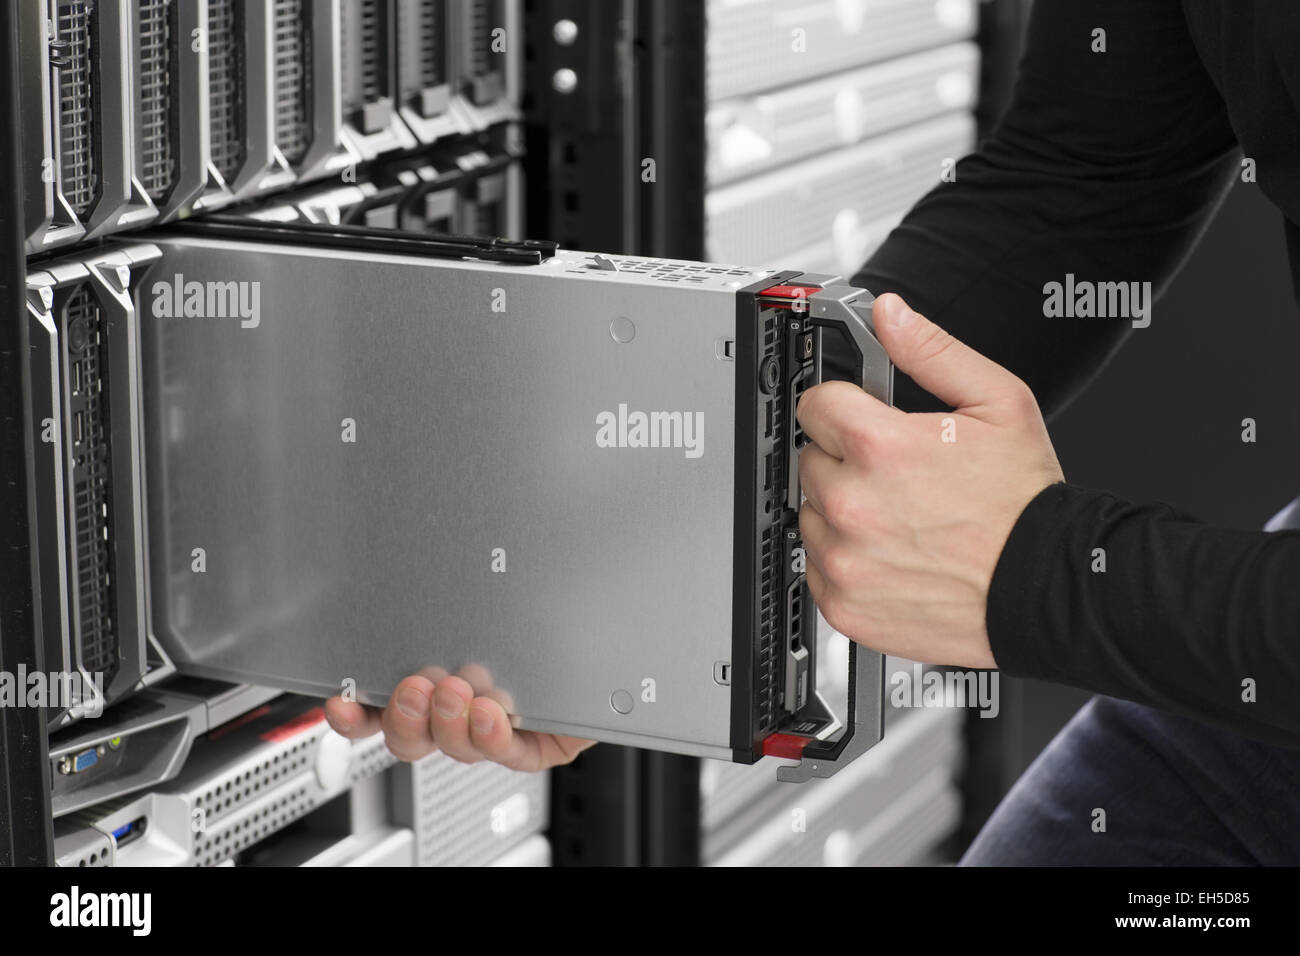 IT technician / engineer install / removes / replace a blade server in a data center. Stock Photo